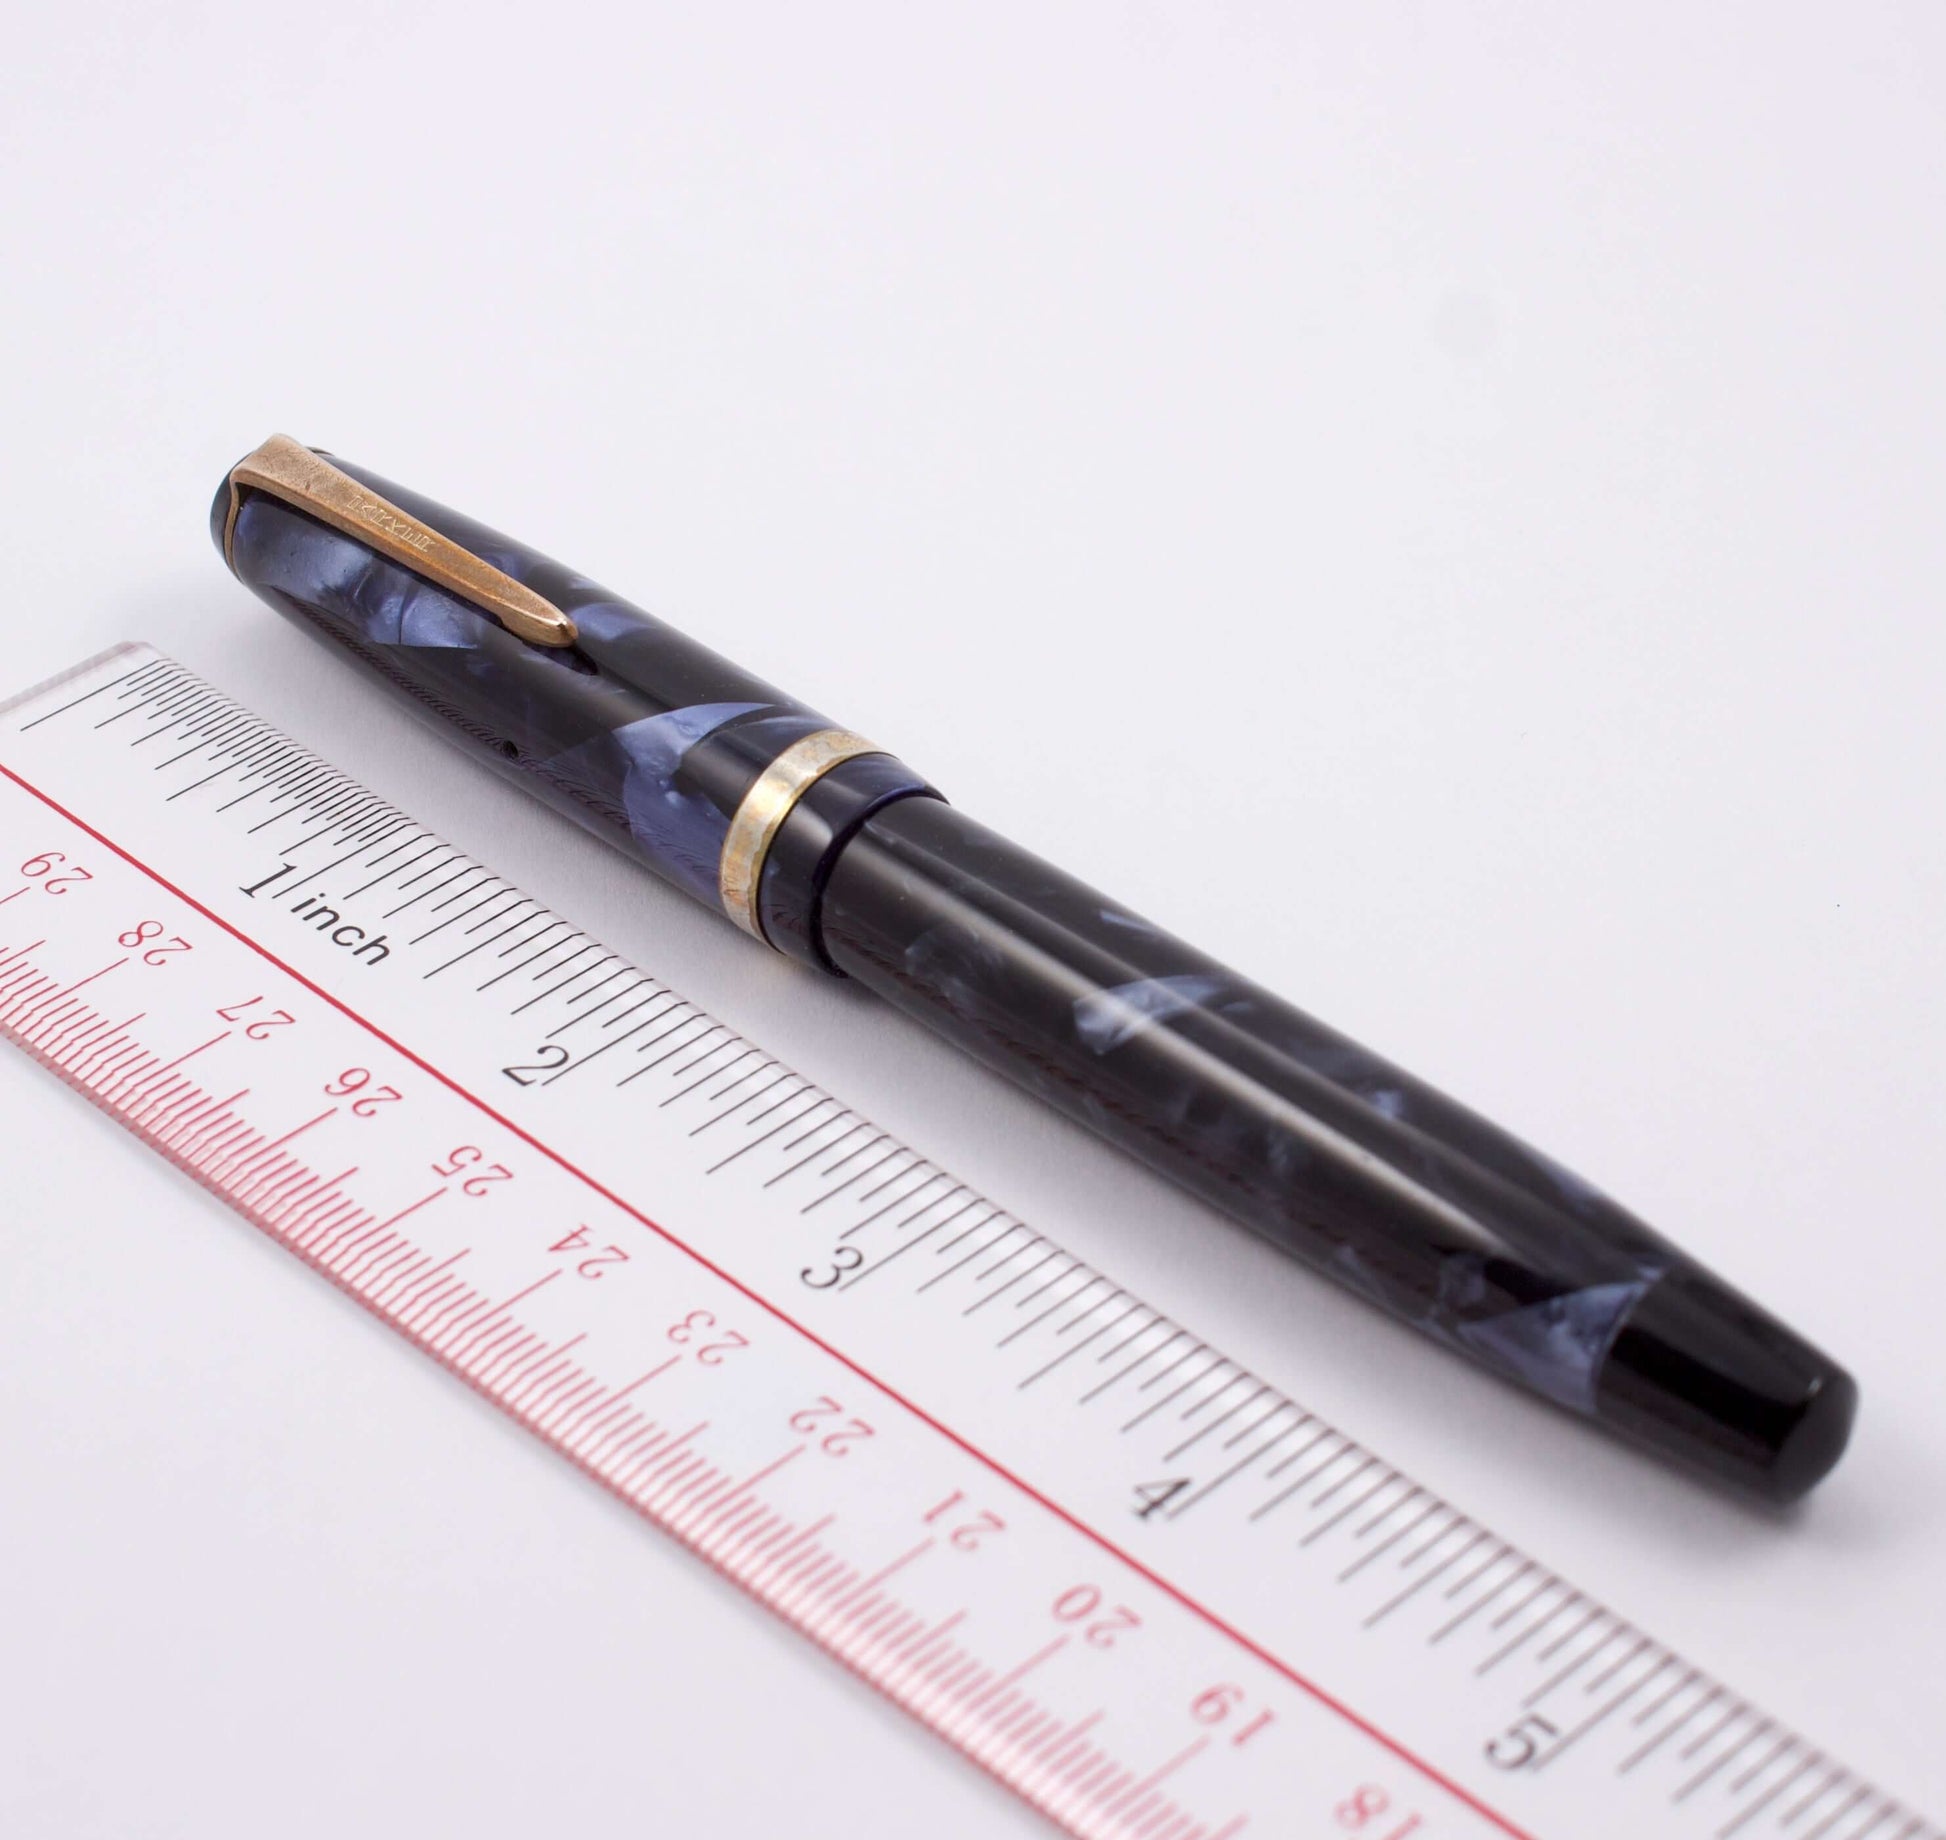 Parker Challenger, Blue Marble, Button Filler, Fine 14K Gold Nib, Restored Type: Parker Button Filler Fountain Pen Manufacture Year: 1940 Length: 5 1/4 Filling System: Button filler with new sac in working condition Color/Pattern: Blue Marble Nib Type/Con